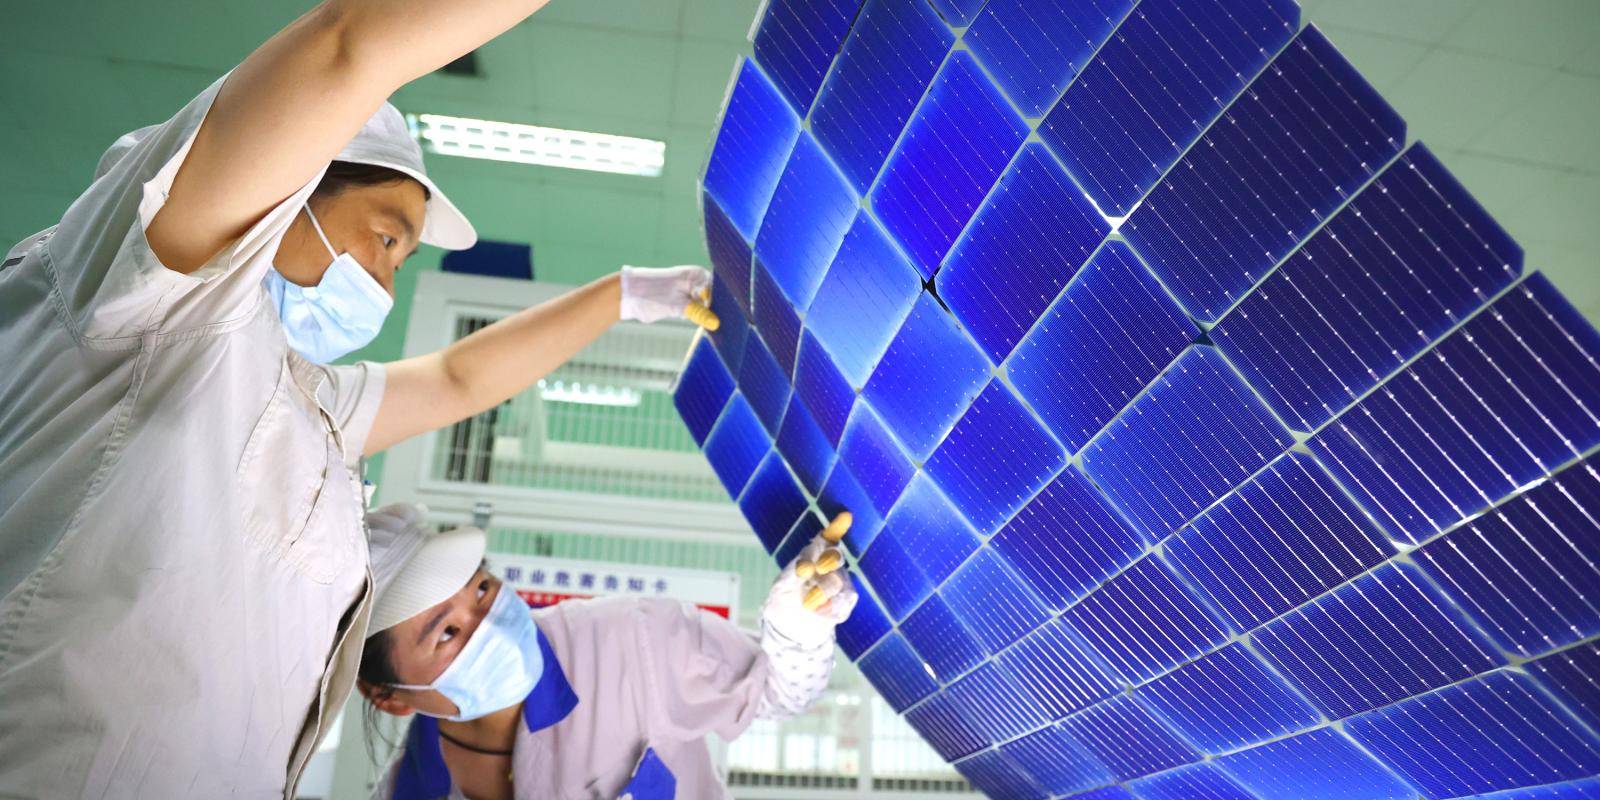 Women working in a Chinese factory producing solar panels.